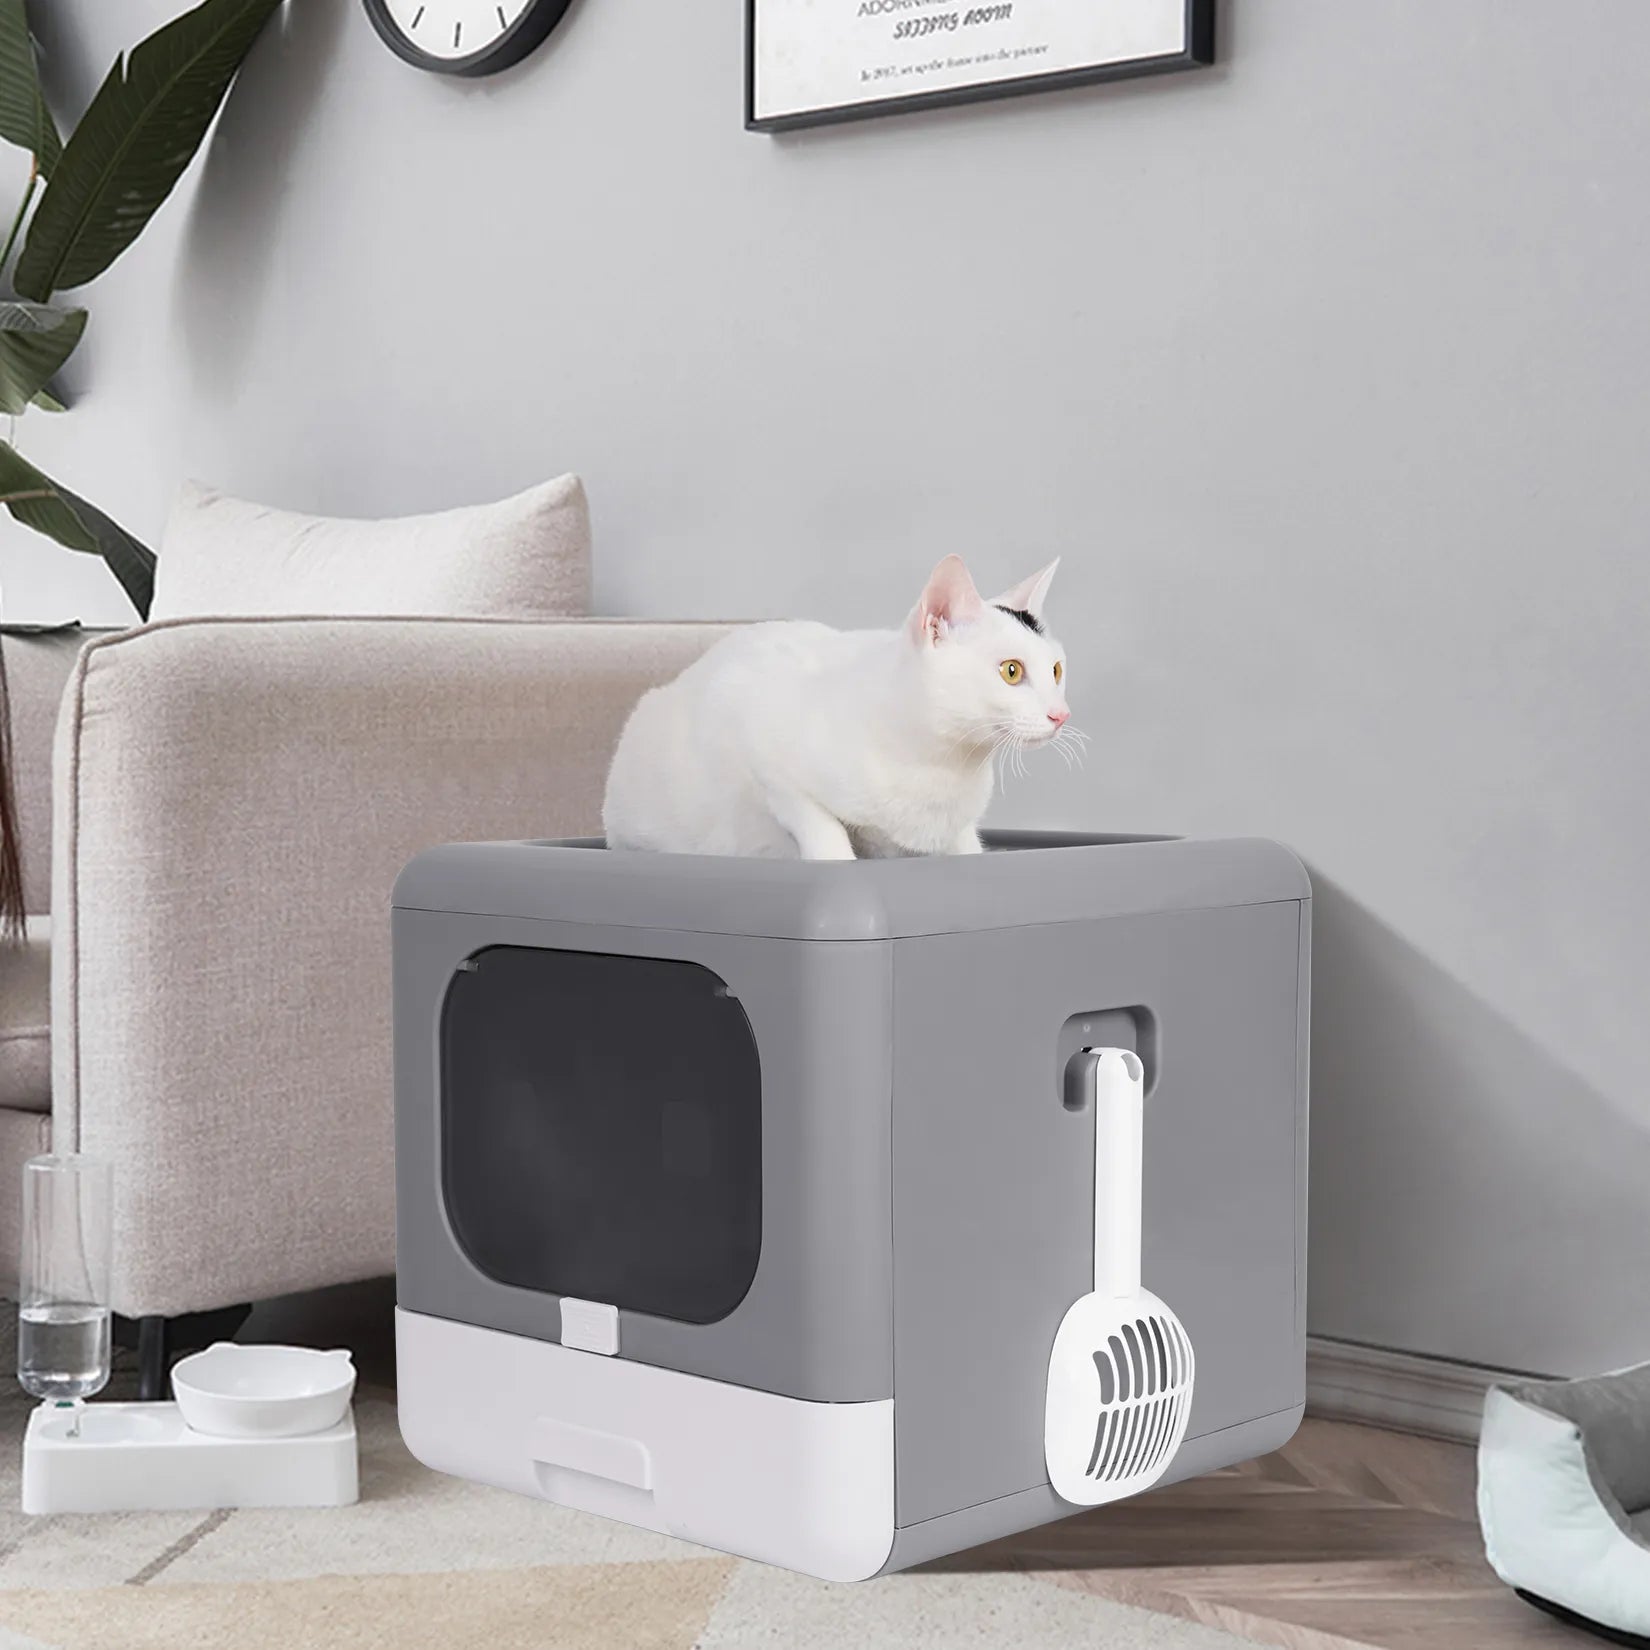 Elegant & Efficient Foldable Litter Box for Cats - Top Entry, Easy-Clean Drawer - Includes Scoop - Ideal for Medium to Large Felines!